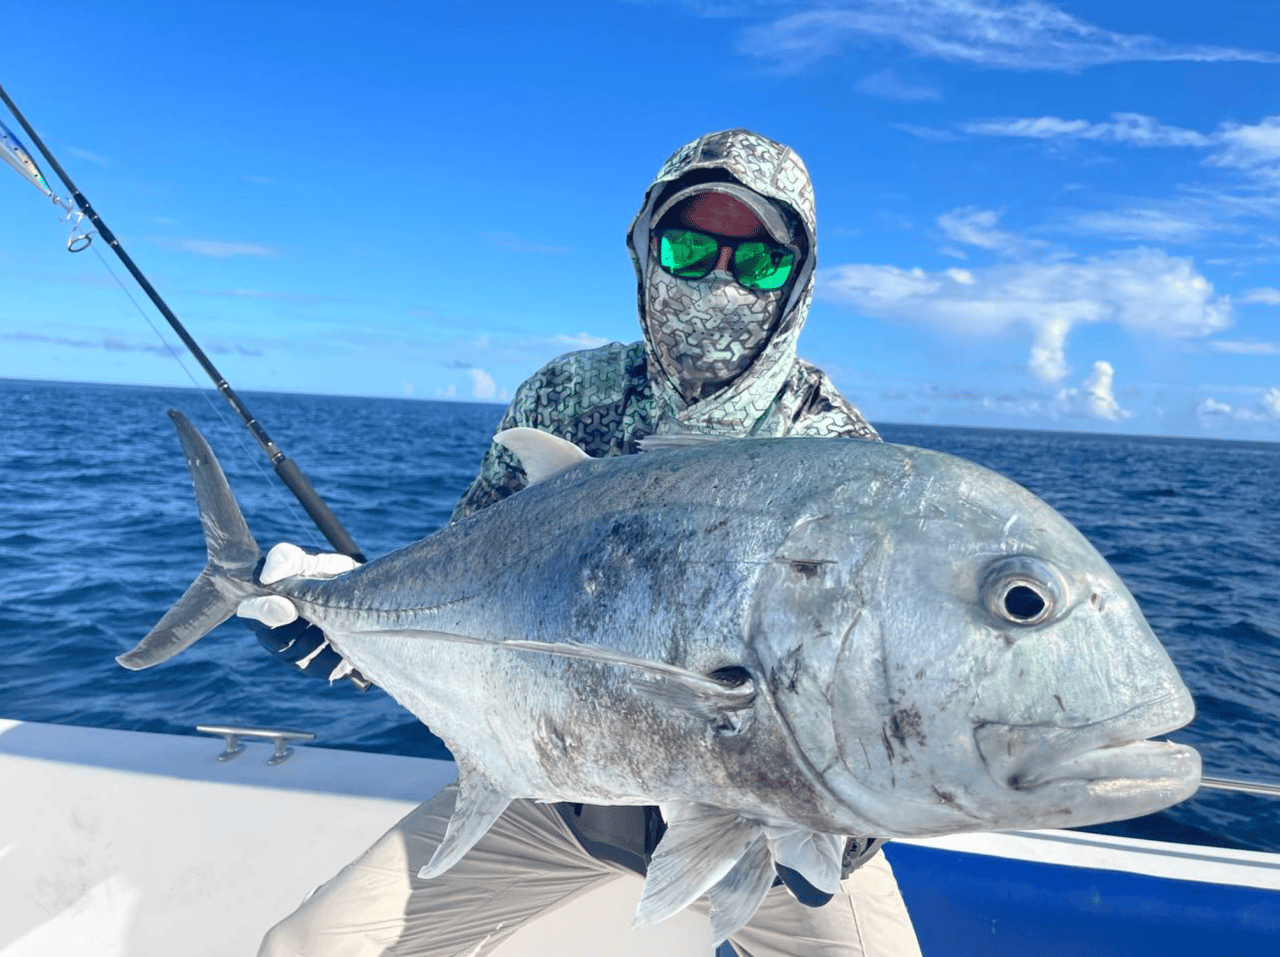 A Giant Trevally caught in The Maldives